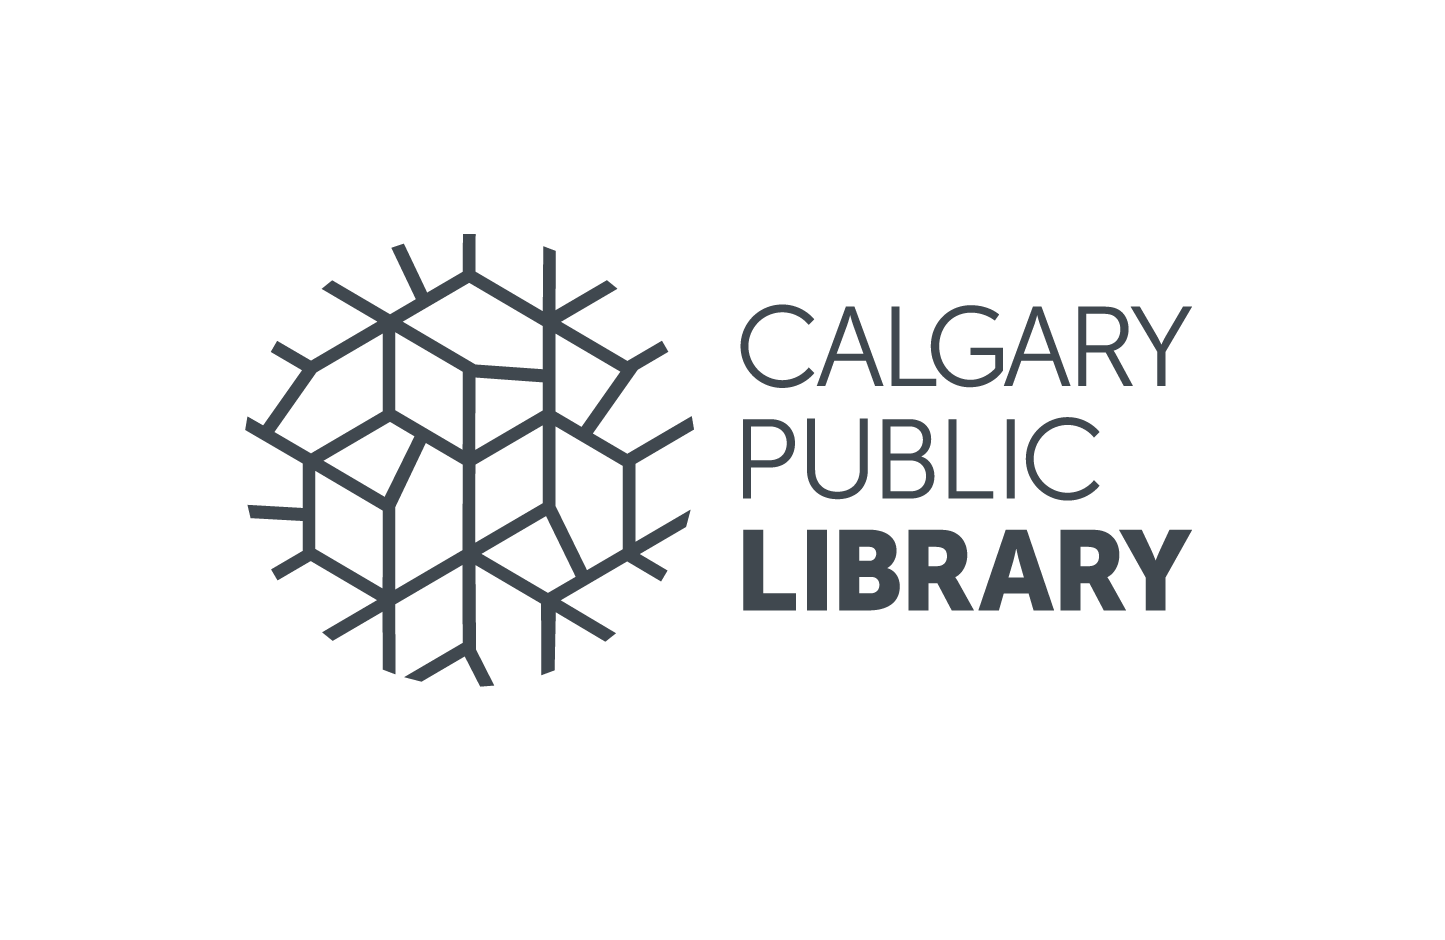 Calgary Public Library Logo GREY Transparent background.png